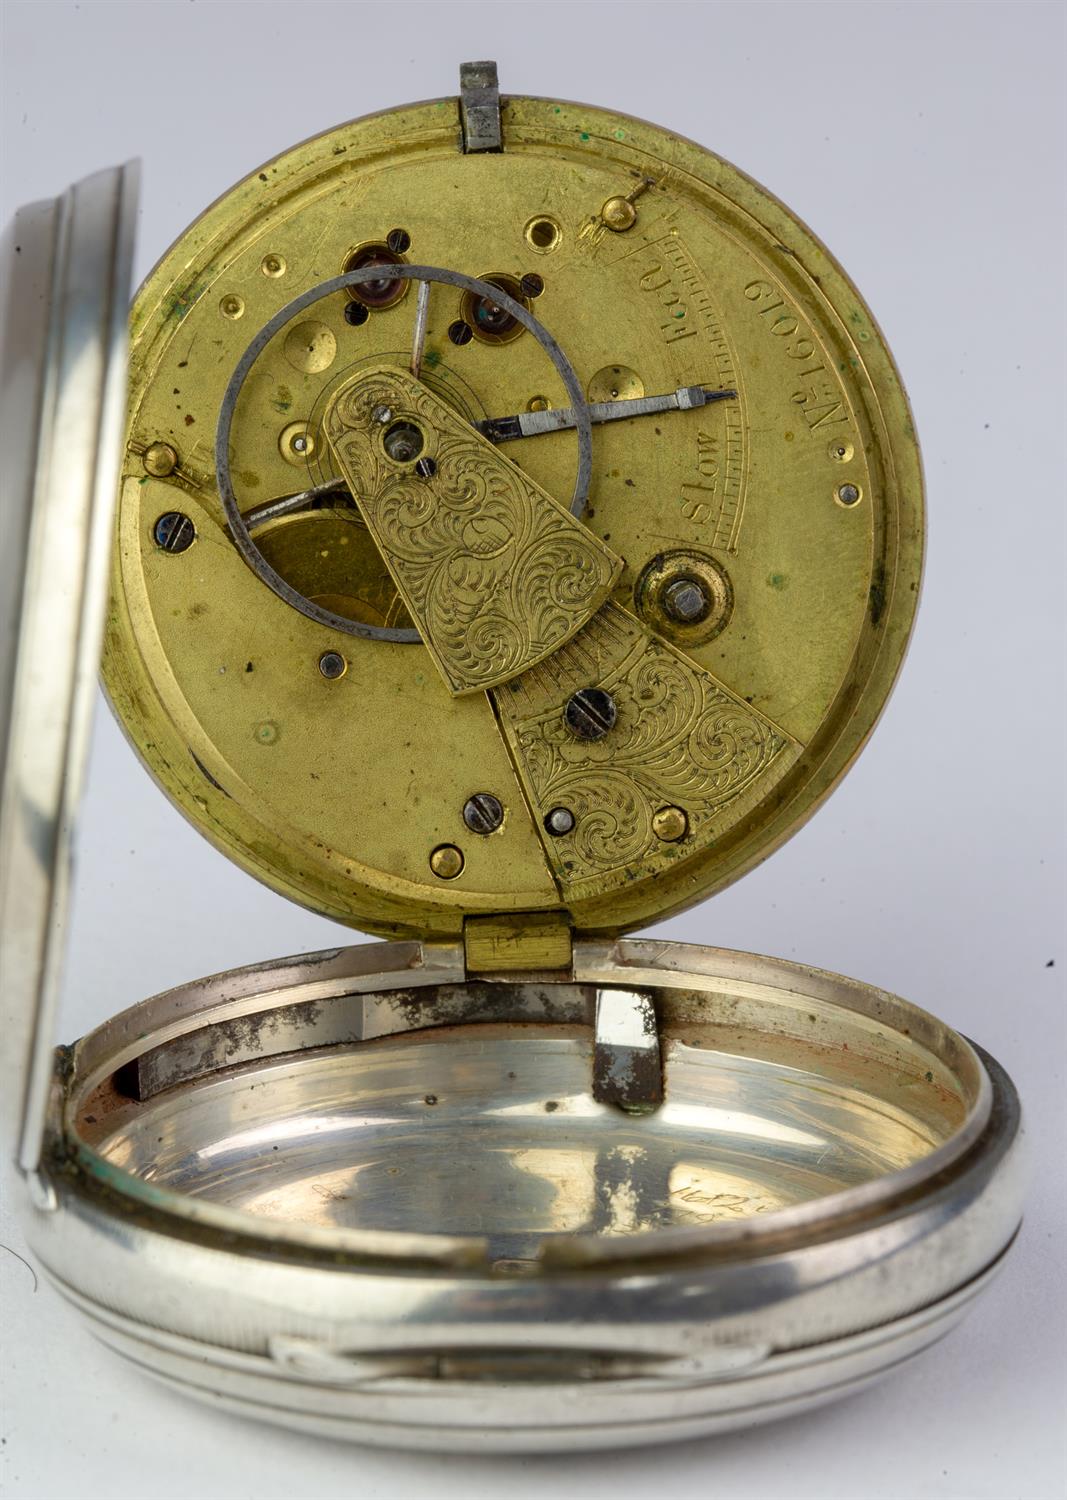 Large gents 19th century Fusee movement, silver pocket watch case by Robert Causer, London 1868 - Image 4 of 6